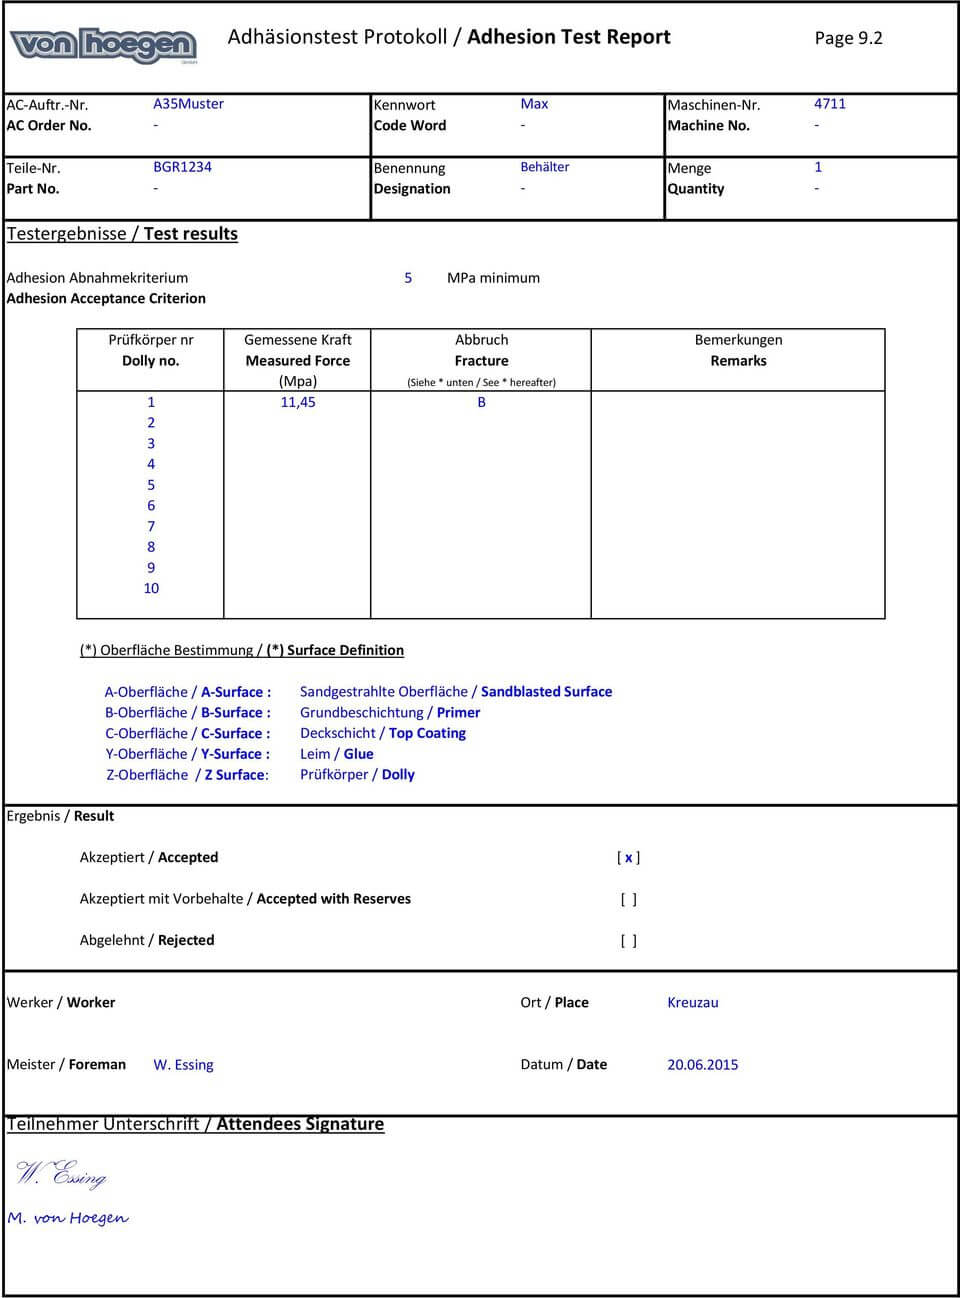 Acceptance Test Report Template ] – Uat Testing Template Inside Acceptance Test Report Template